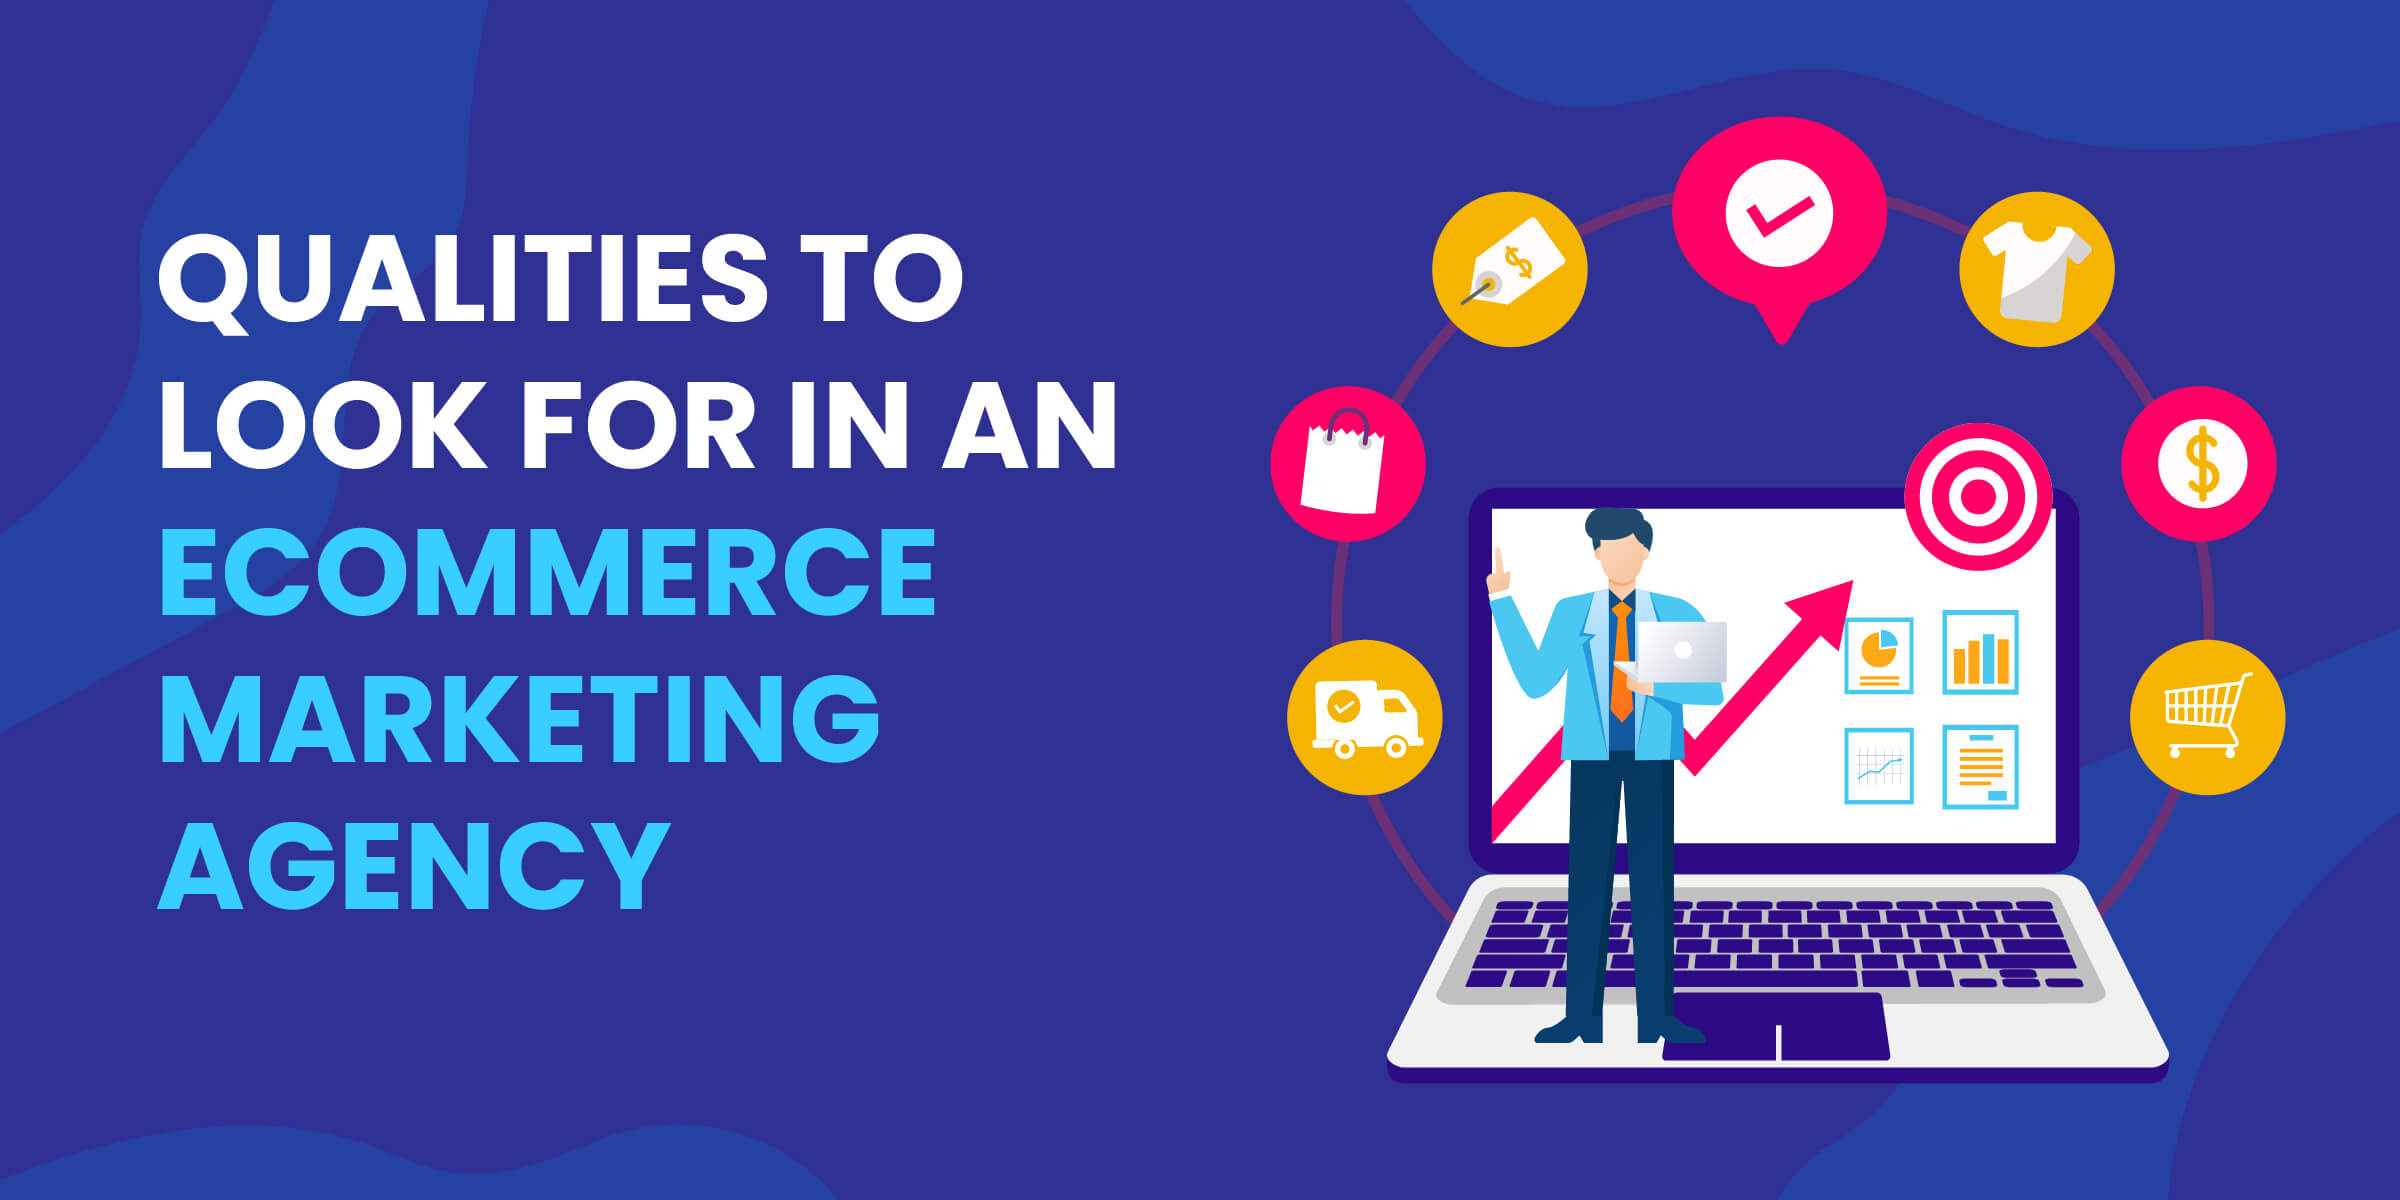 Qualities to Look for in eCommerce Agency